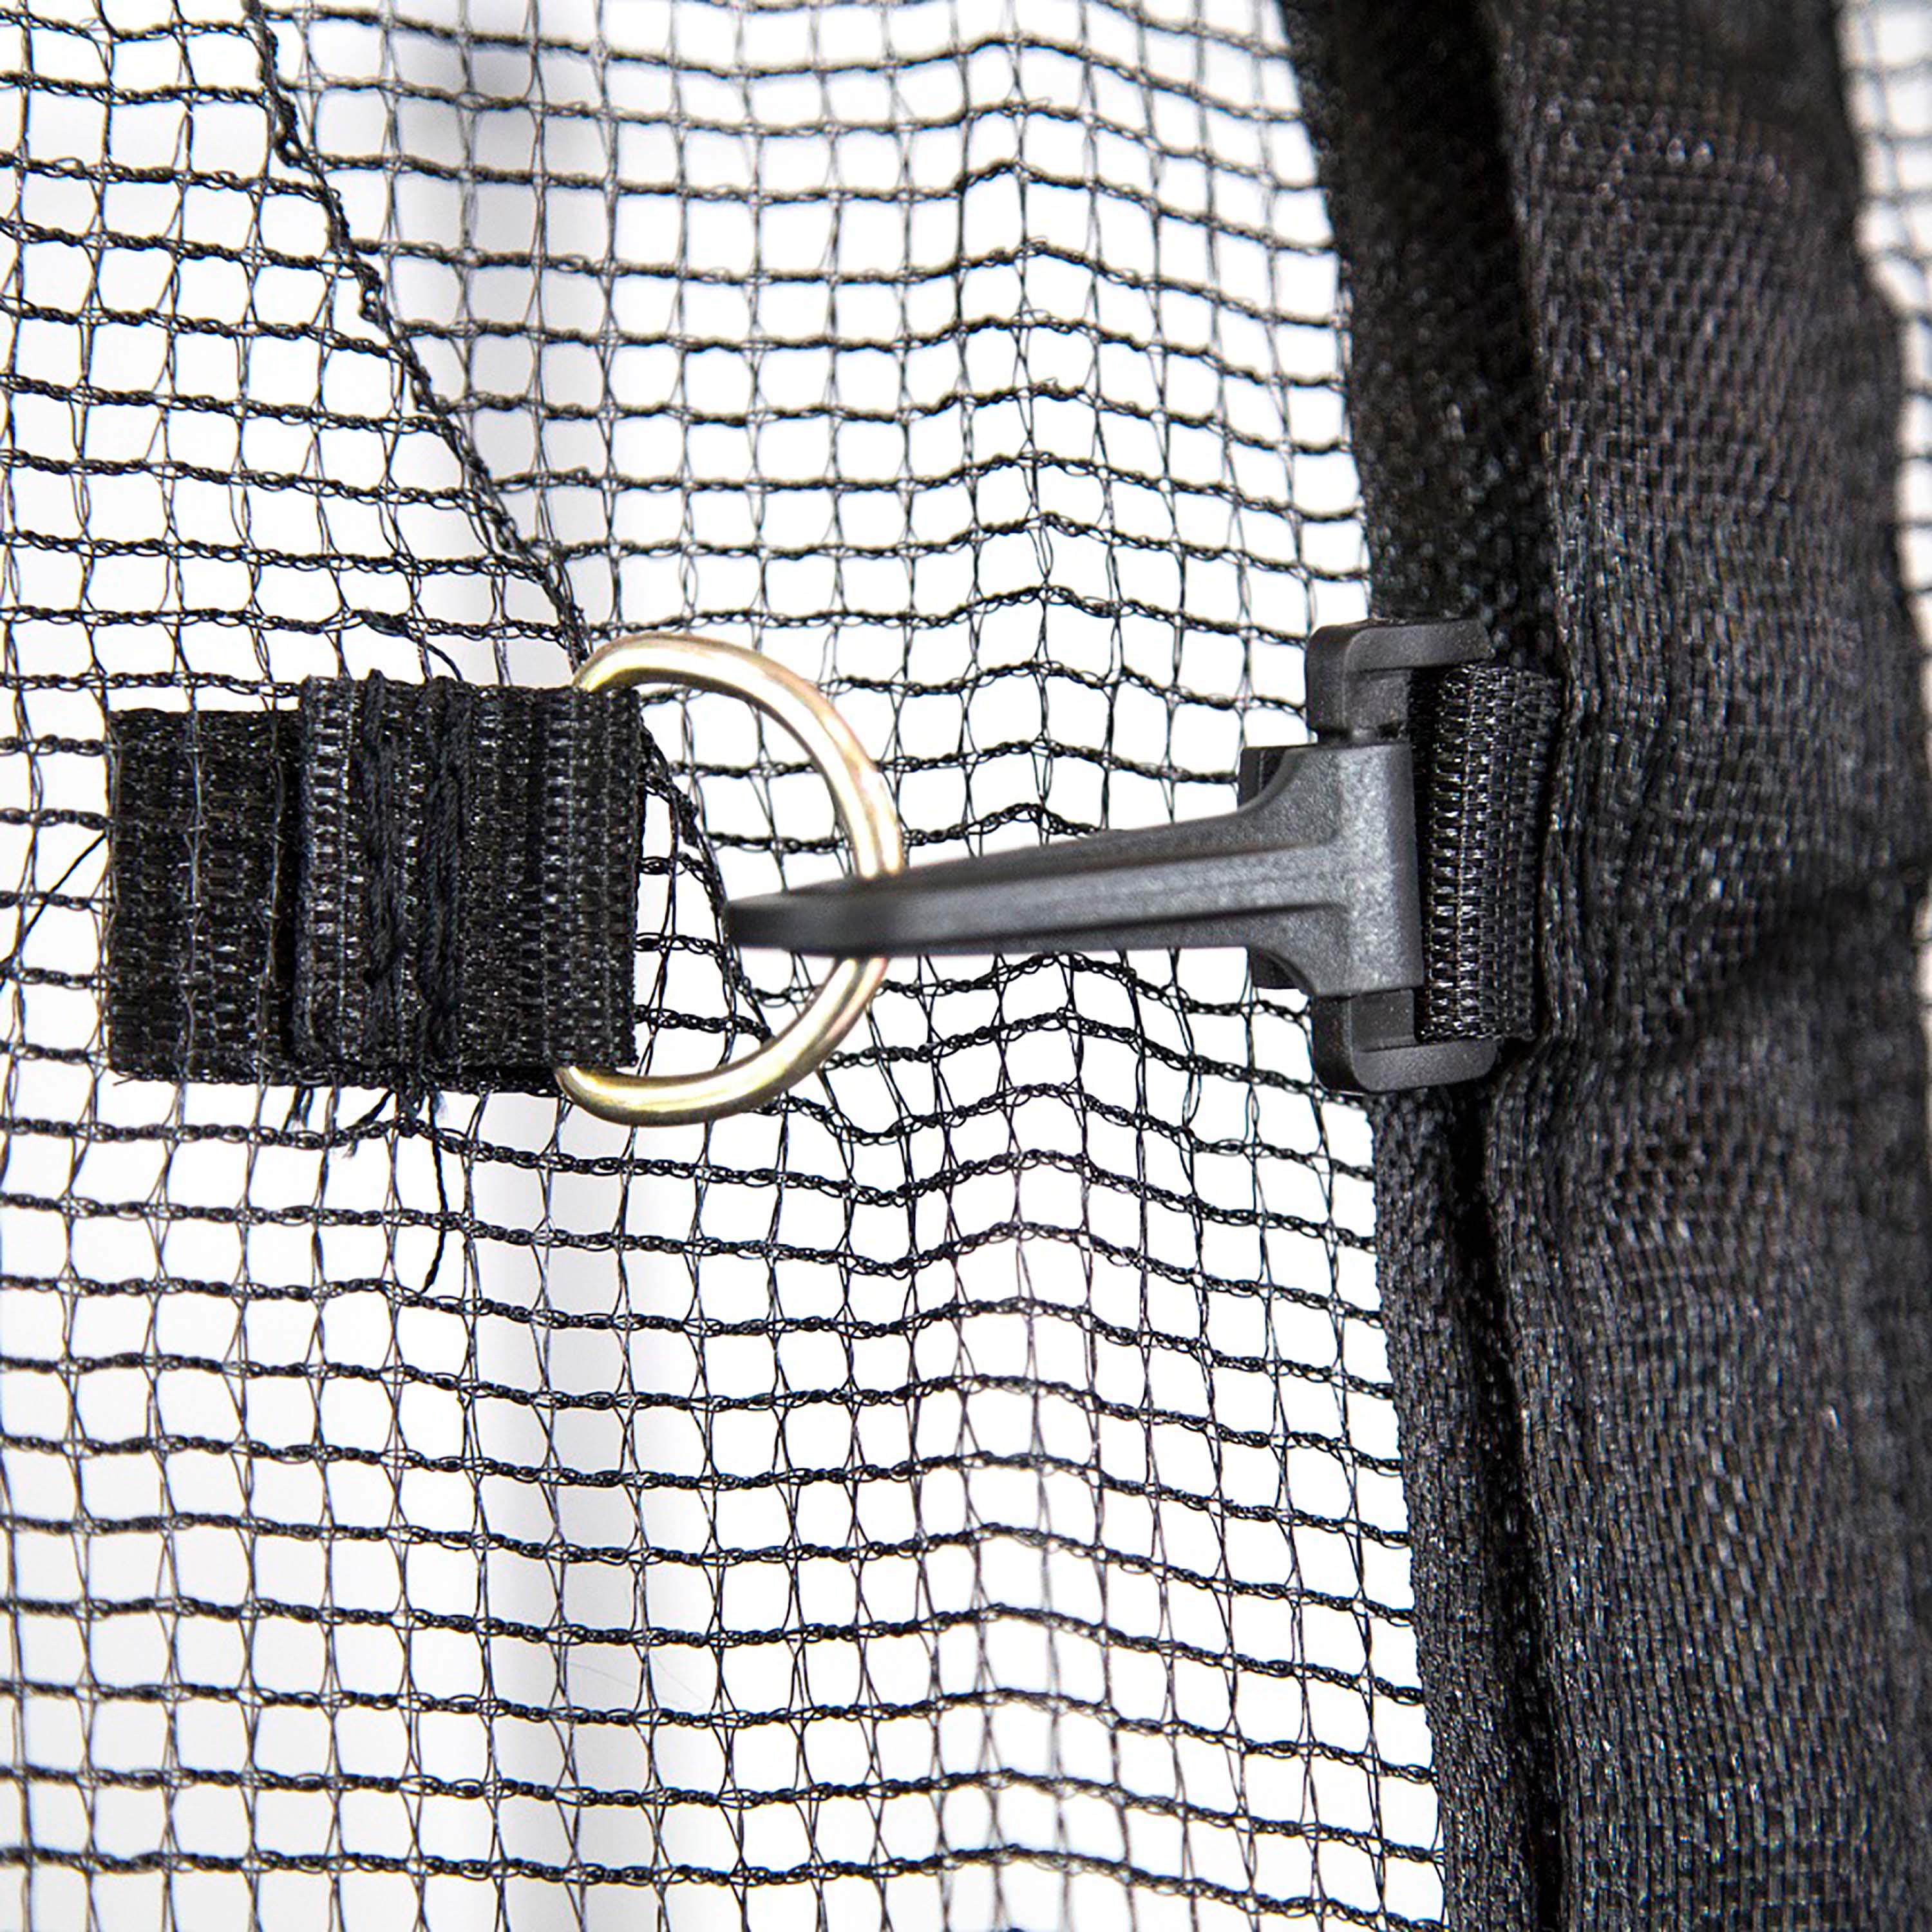 View of the black enclosure clip on the net. 